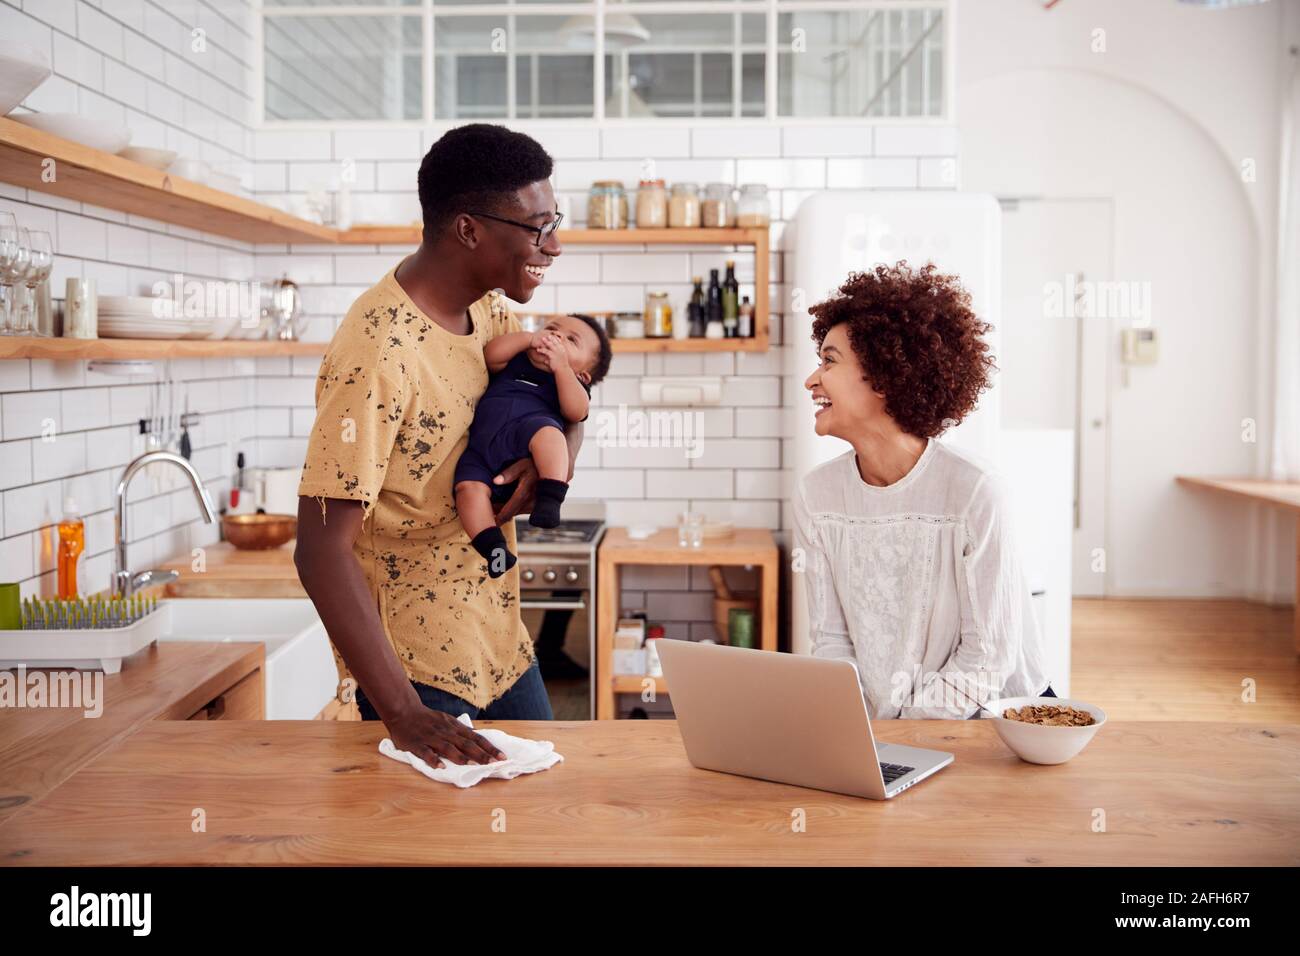 Multi-Tasking Father Holds Baby Son And Cleans Surface As Mother Uses Laptop And Eats Breakfast Stock Photo